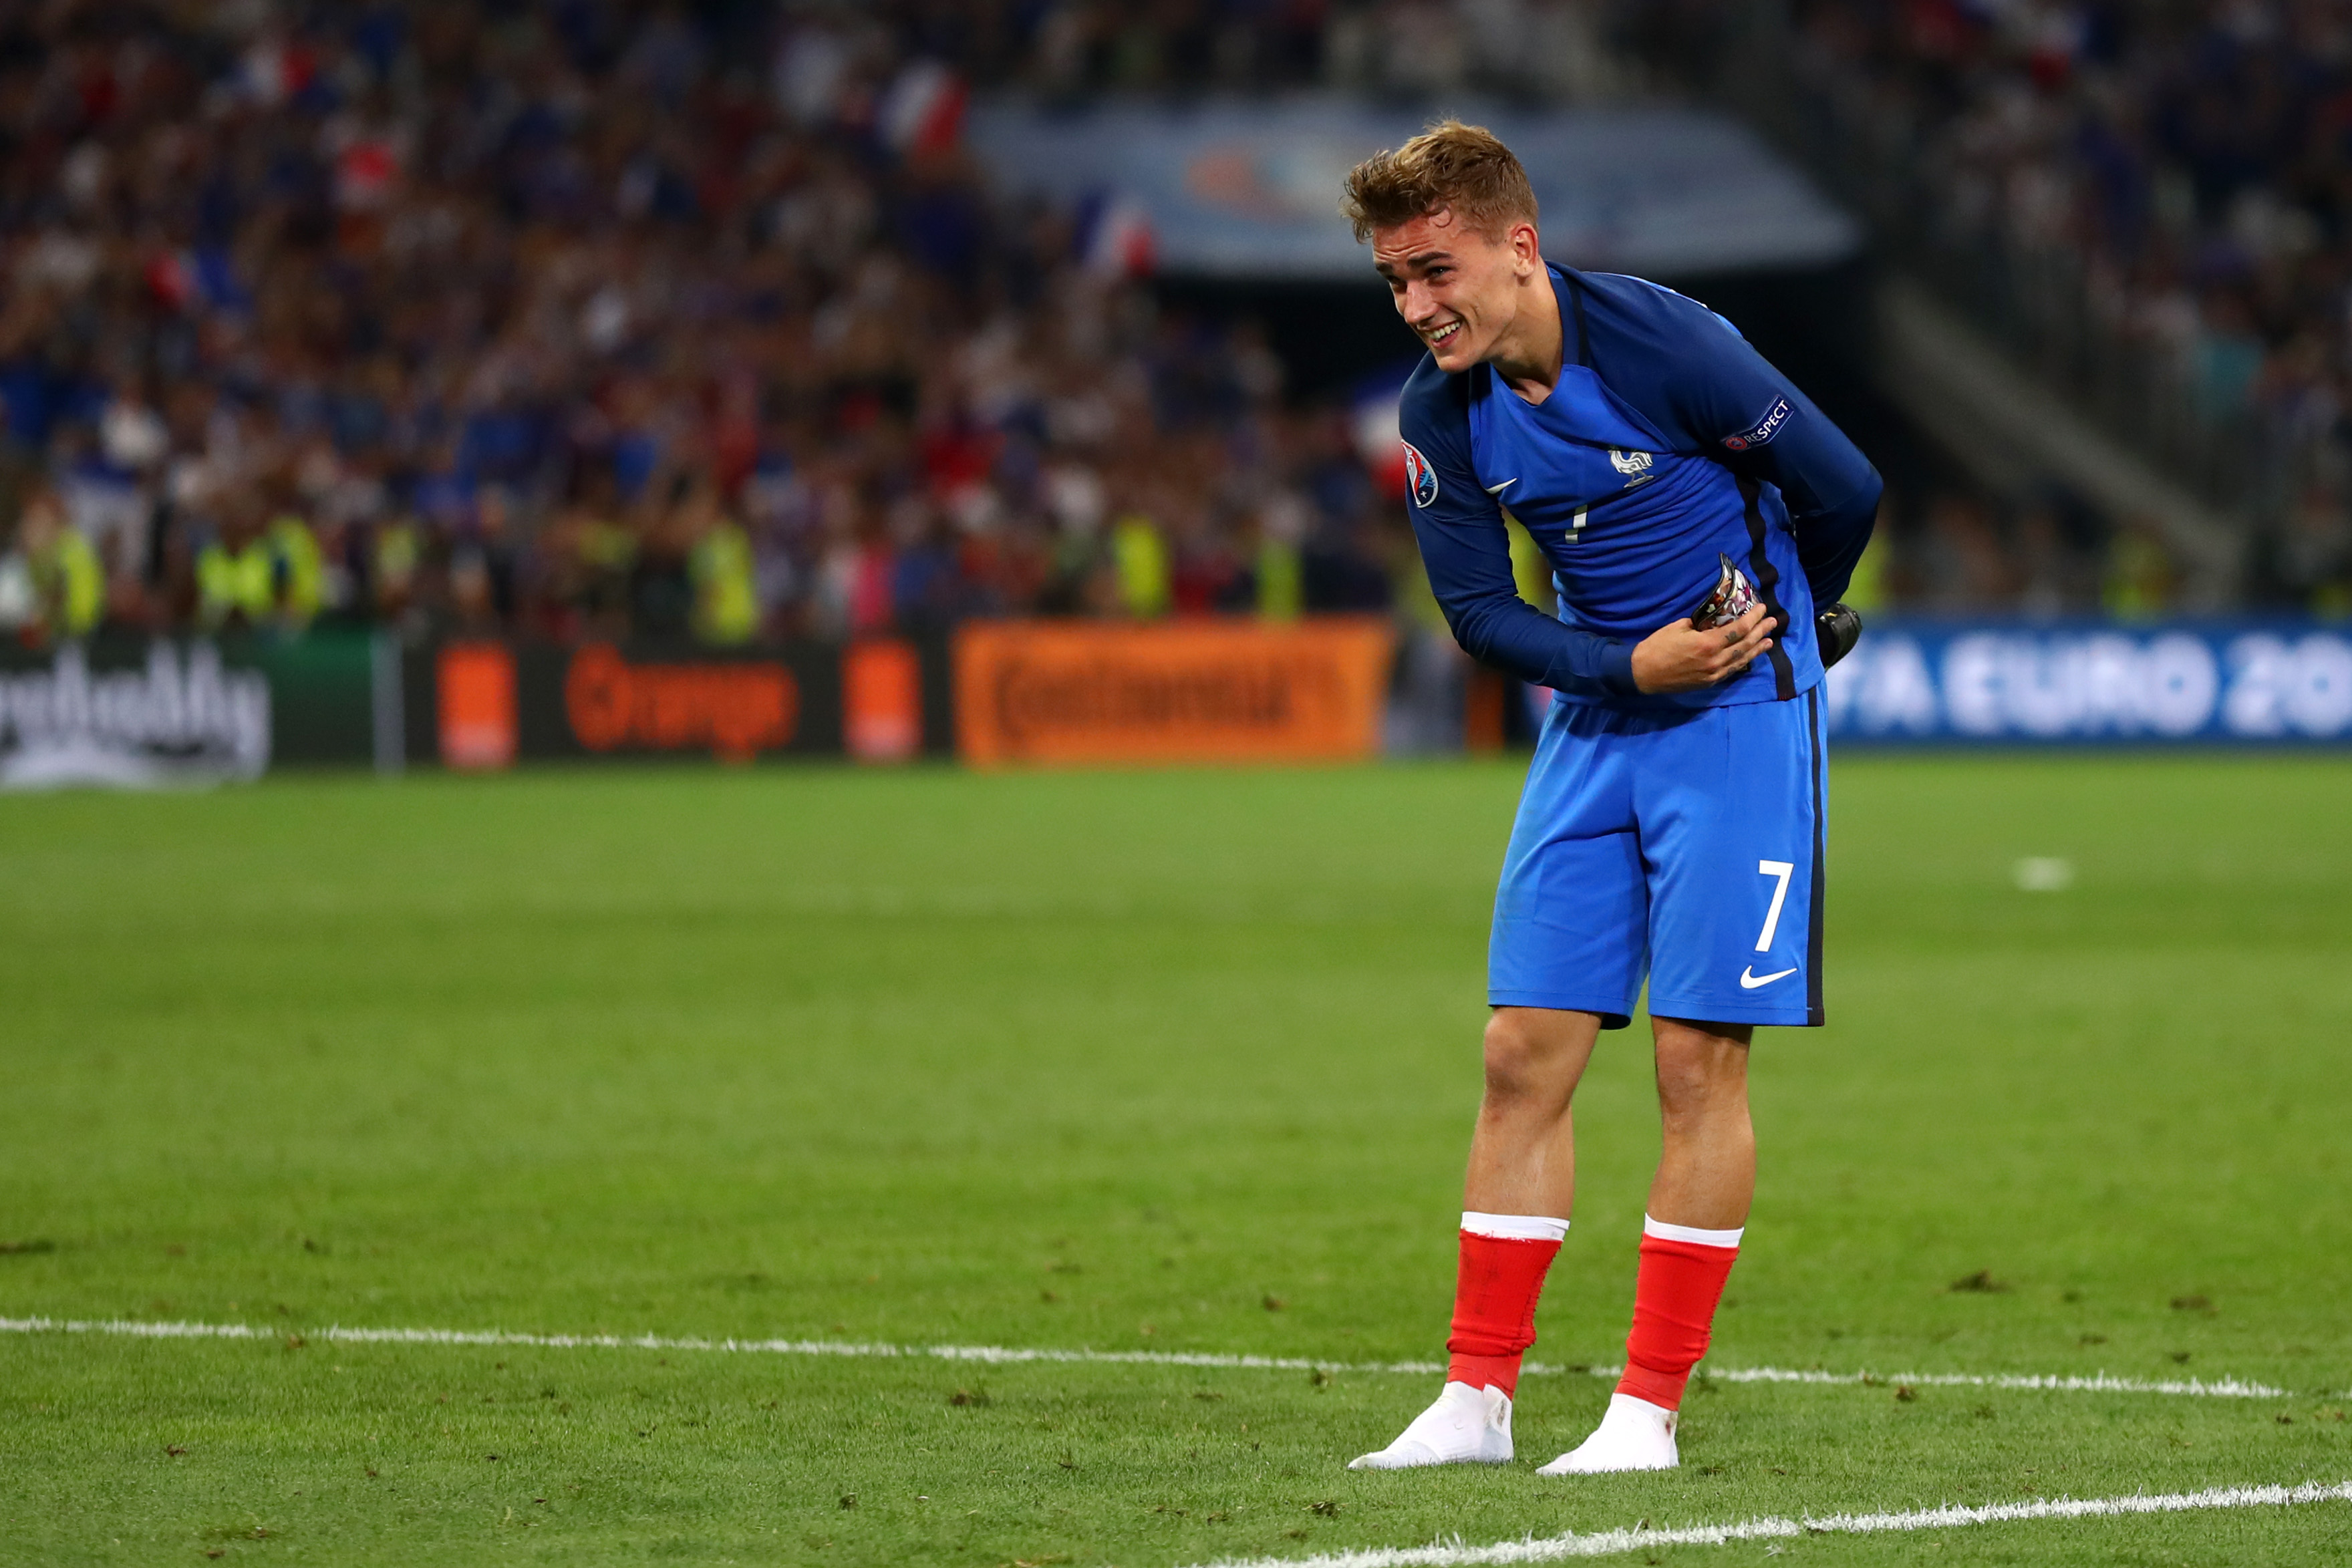 MARSEILLE, FRANCE - JULY 07:  Antoine Griezmann of France salutes to supporters after his team's 2-0 win in the UEFA EURO semi final match between Germany and France at Stade Velodrome on July 7, 2016 in Marseille, France.  (Photo by Lars Baron/Getty Images)